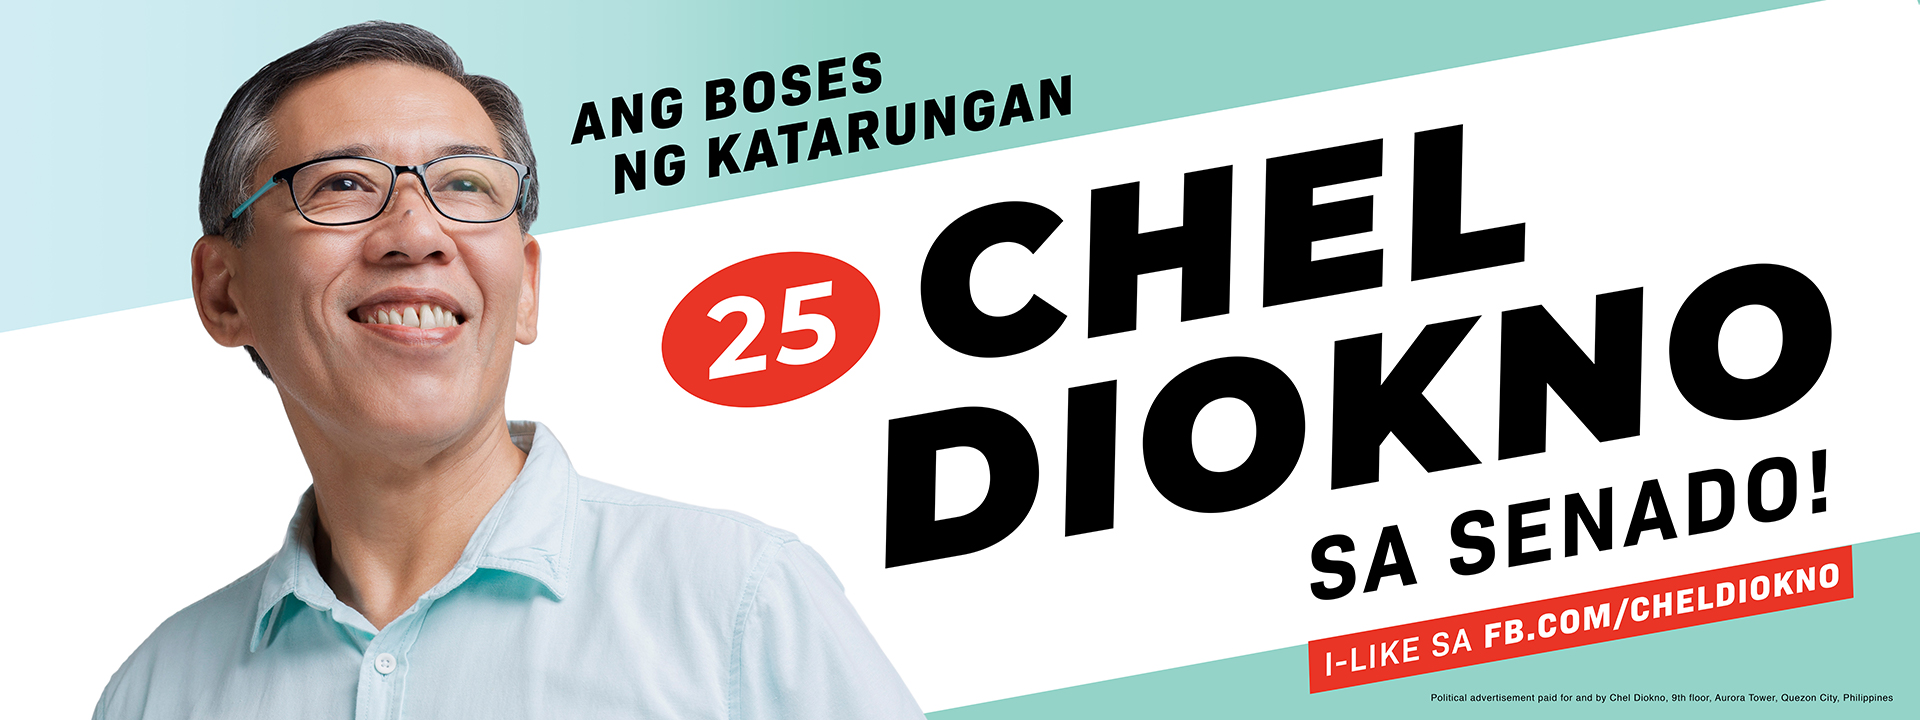 Downloads For Chel Atty Chel Diokno